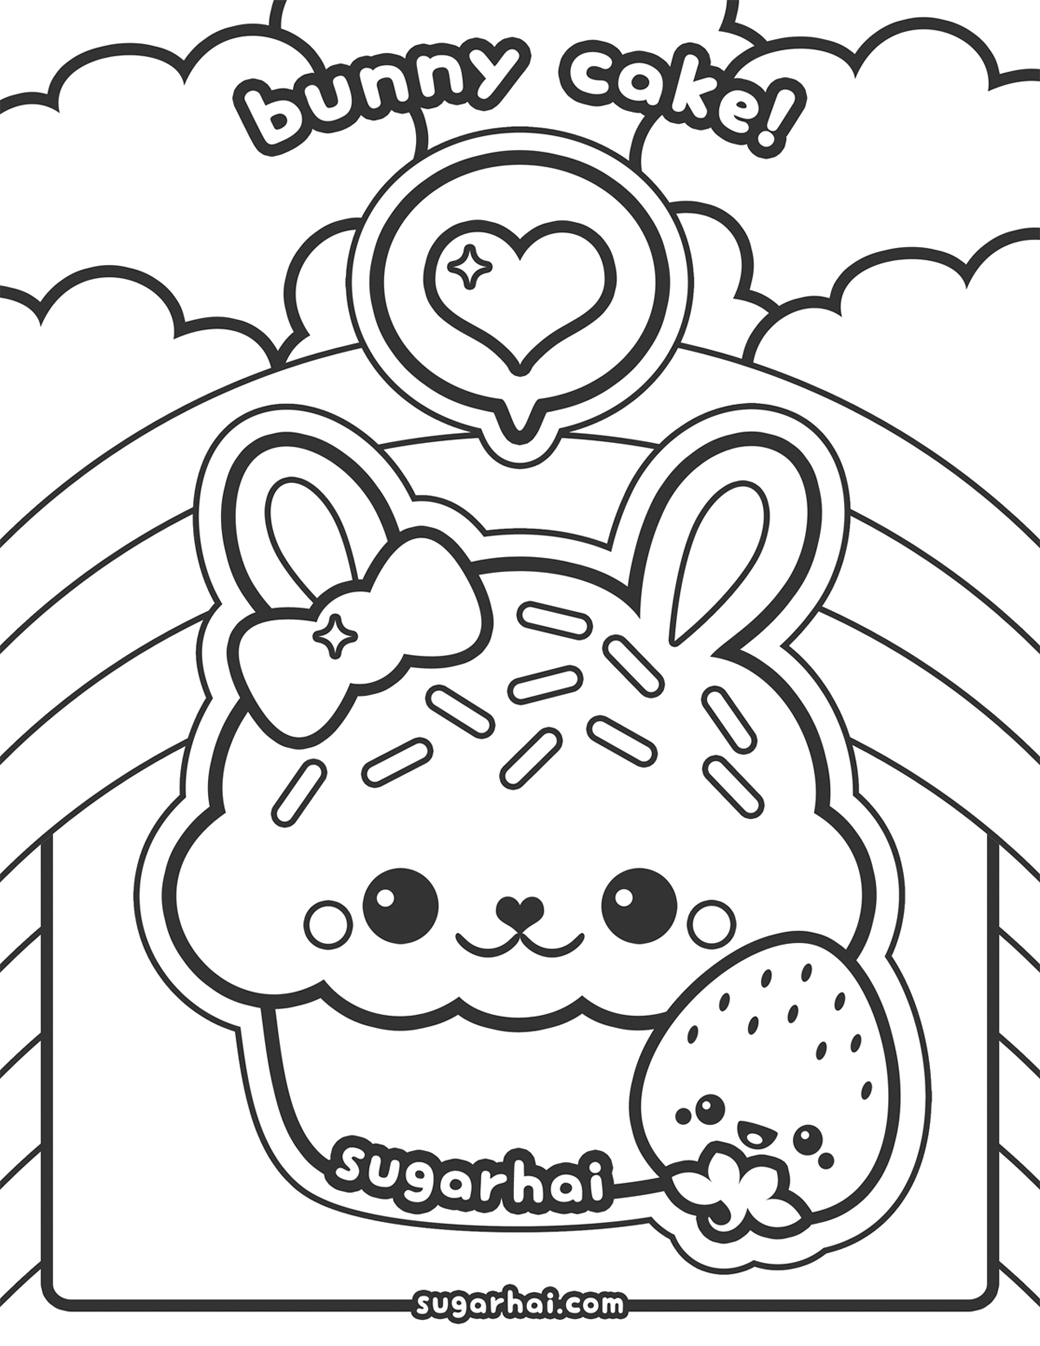 Cute Cupcakes - Coloring Pages for Kids and for Adults